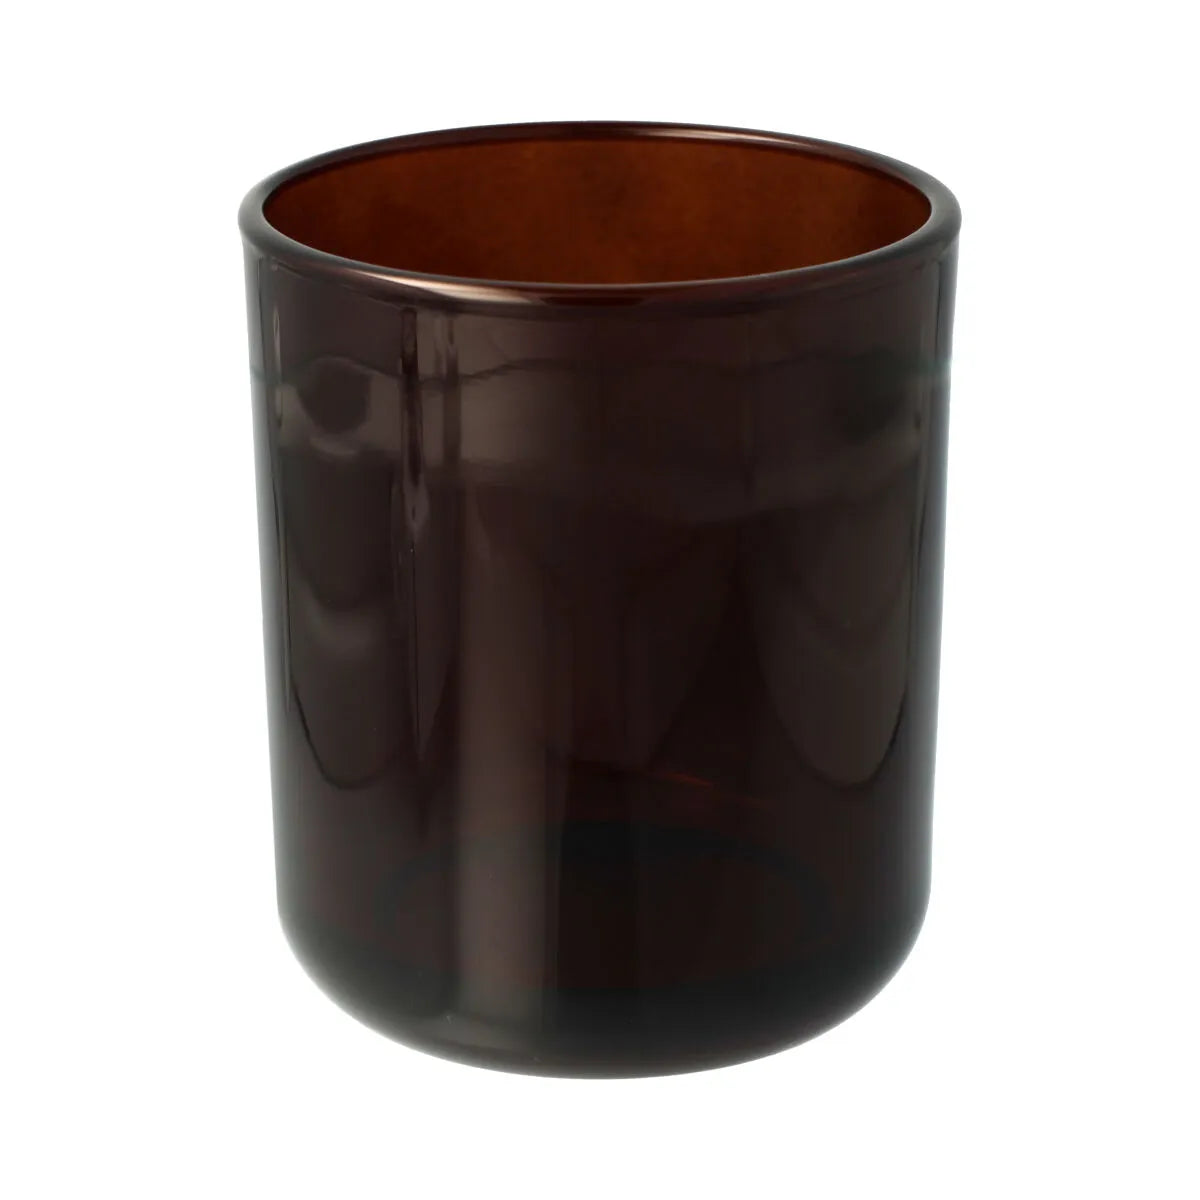 Cinnamon Sticks Large Soy Candle